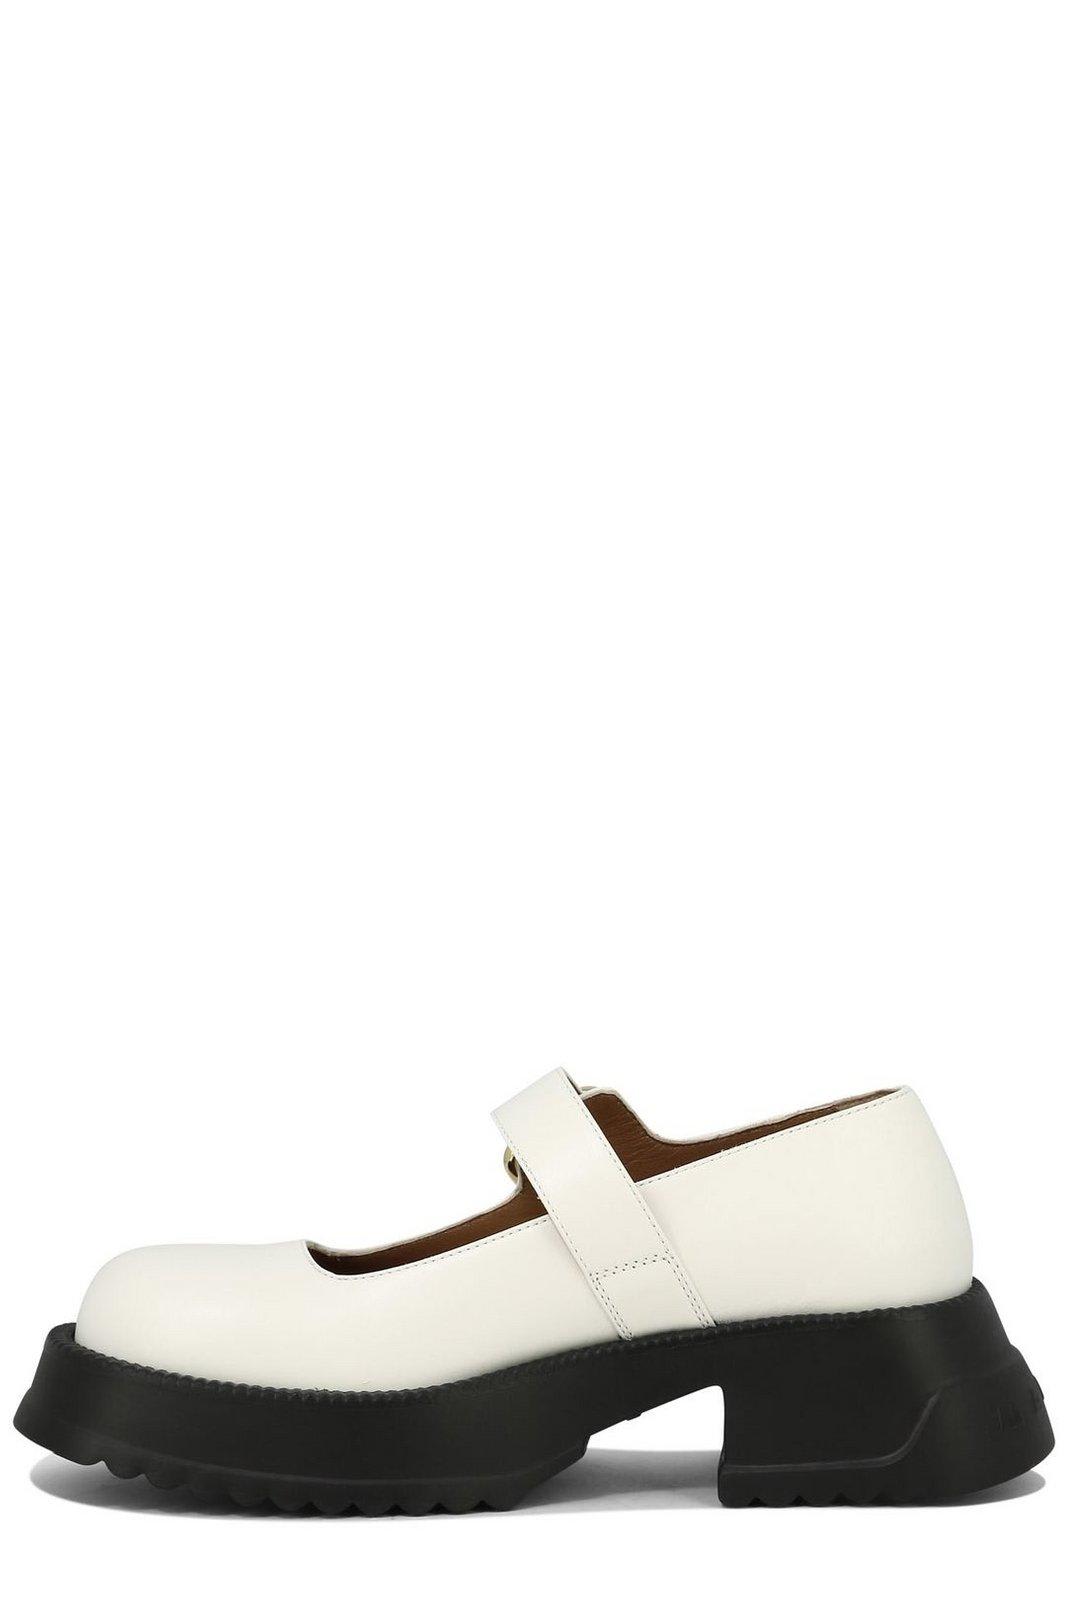 Shop Marni Buckle Detailed Platform Mary Janes In White